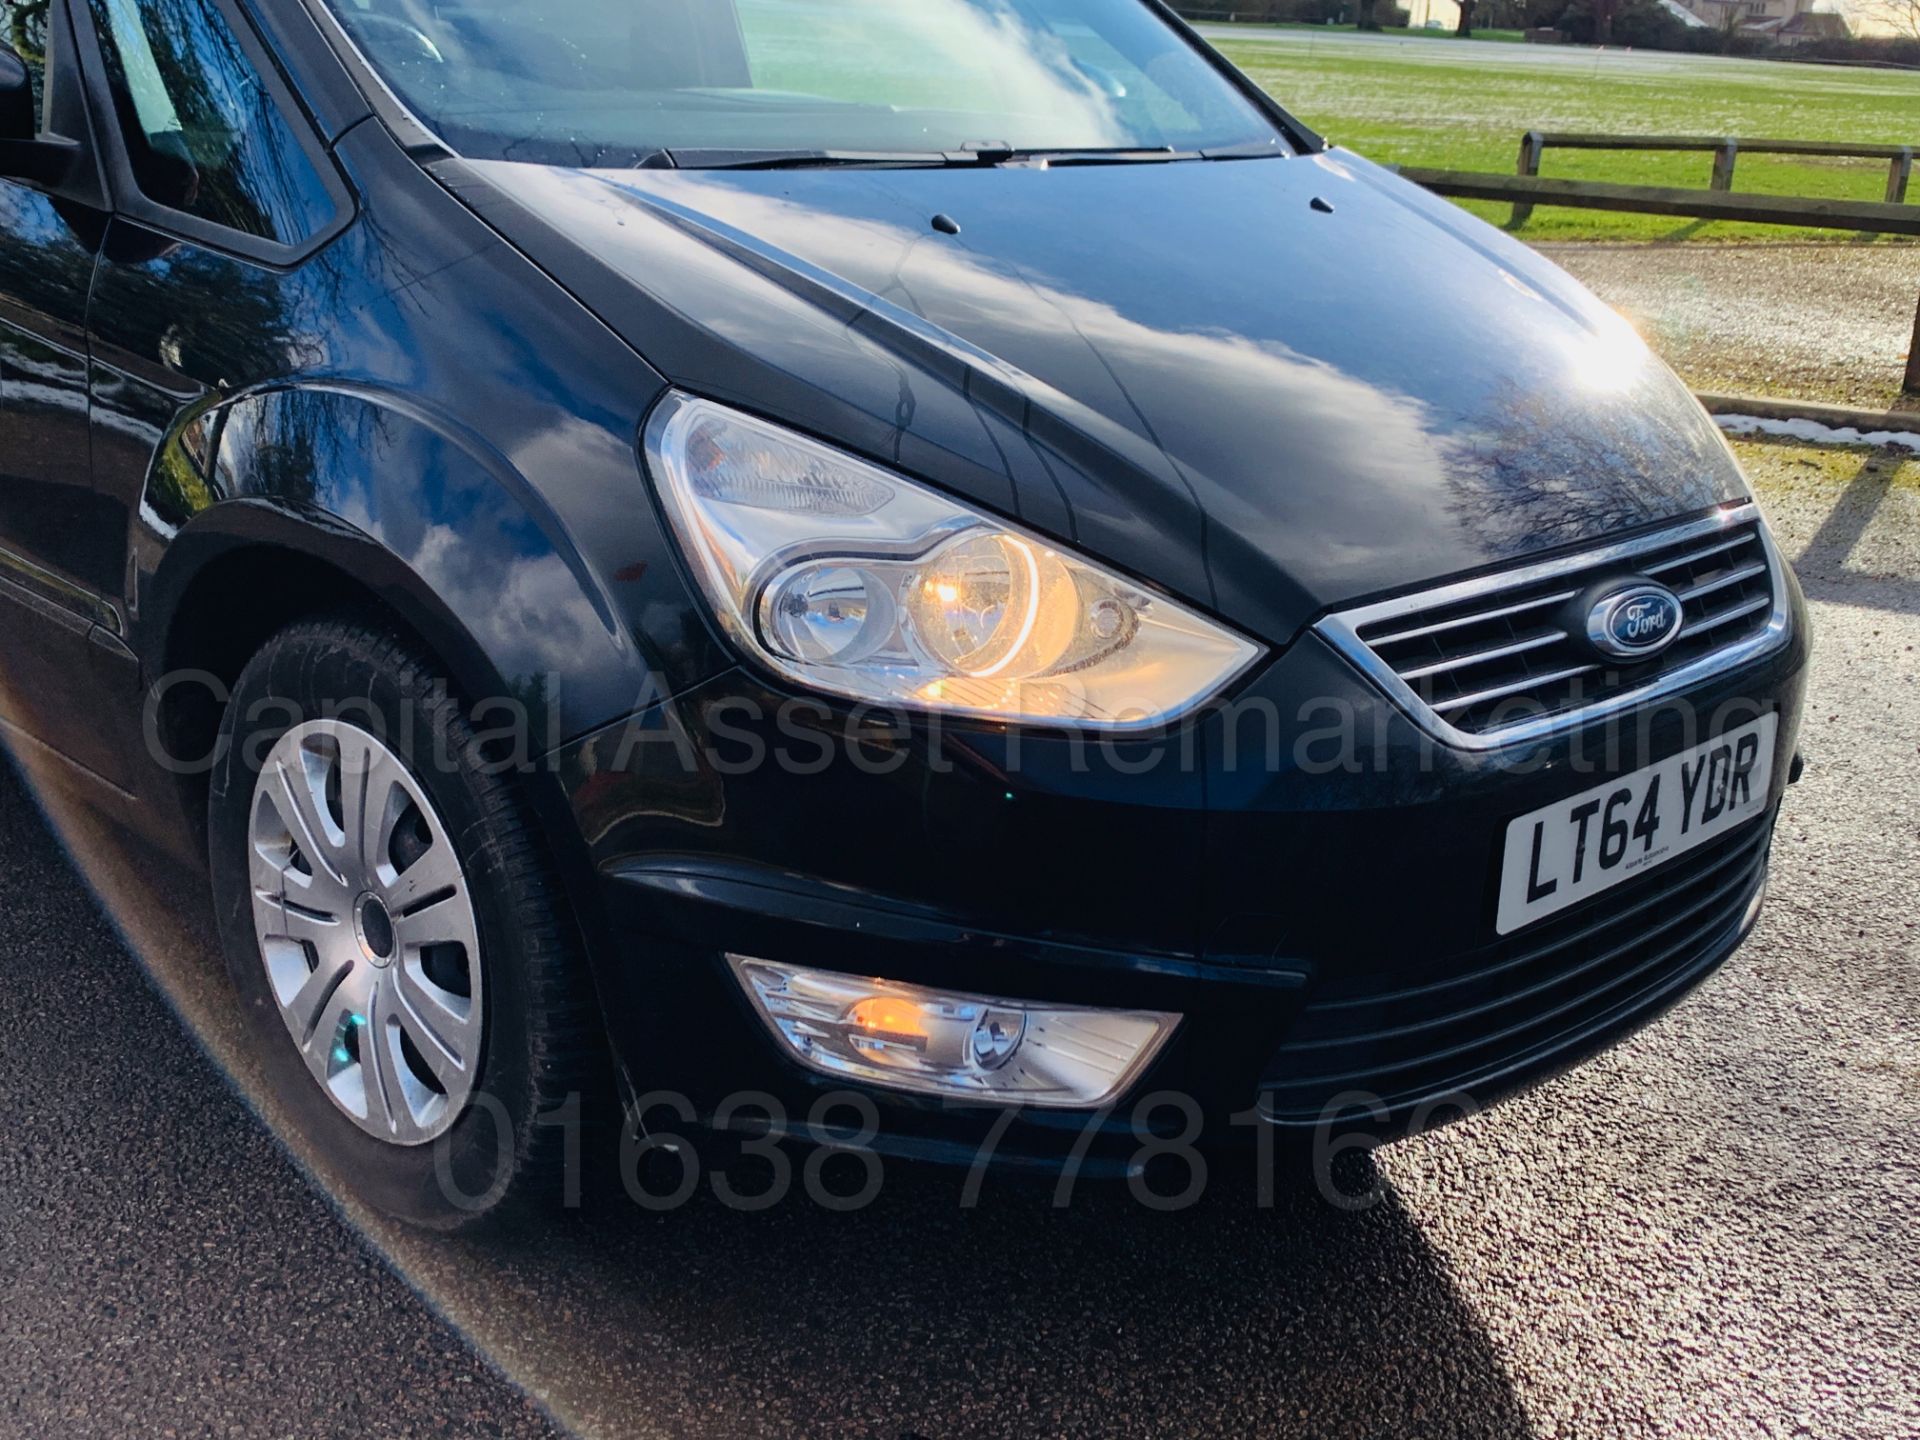 FORD GALAXY **ZETEC** 7 SEATER MPV (2015 MODEL) 2.0 TDCI - 140 BHP - AUTO POWER SHIFT (1 OWNER) - Image 13 of 40